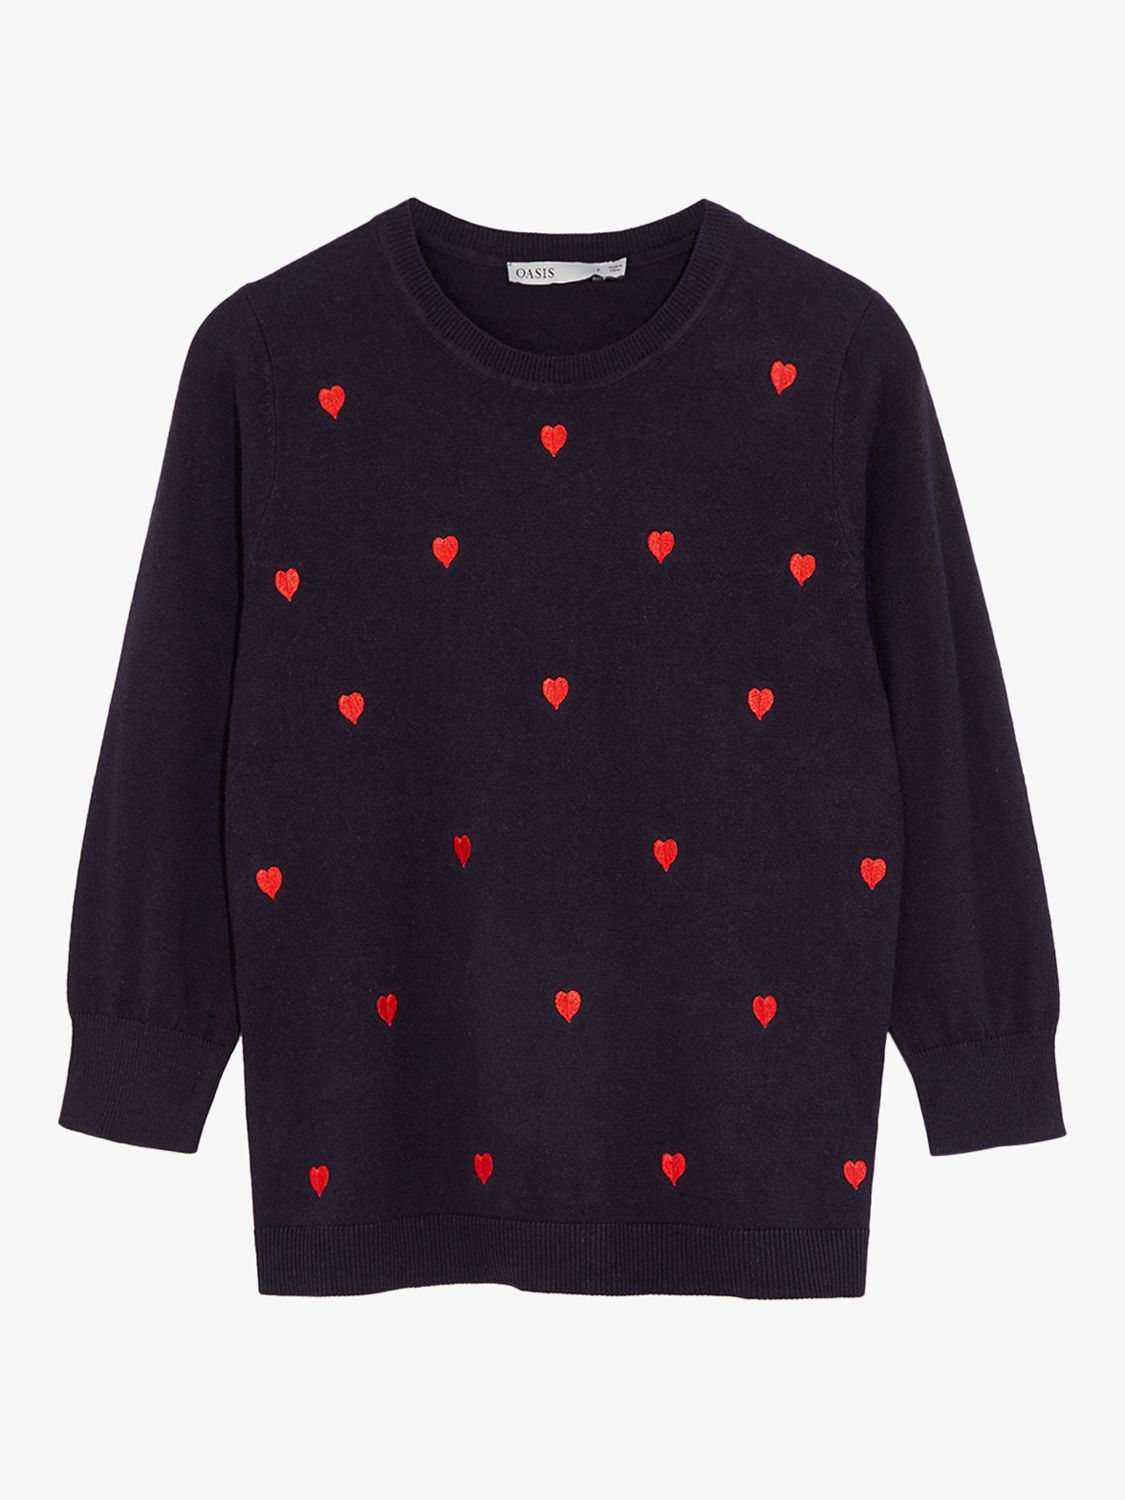 Oasis Heart Embroidered Jumper at John Lewis & Partners